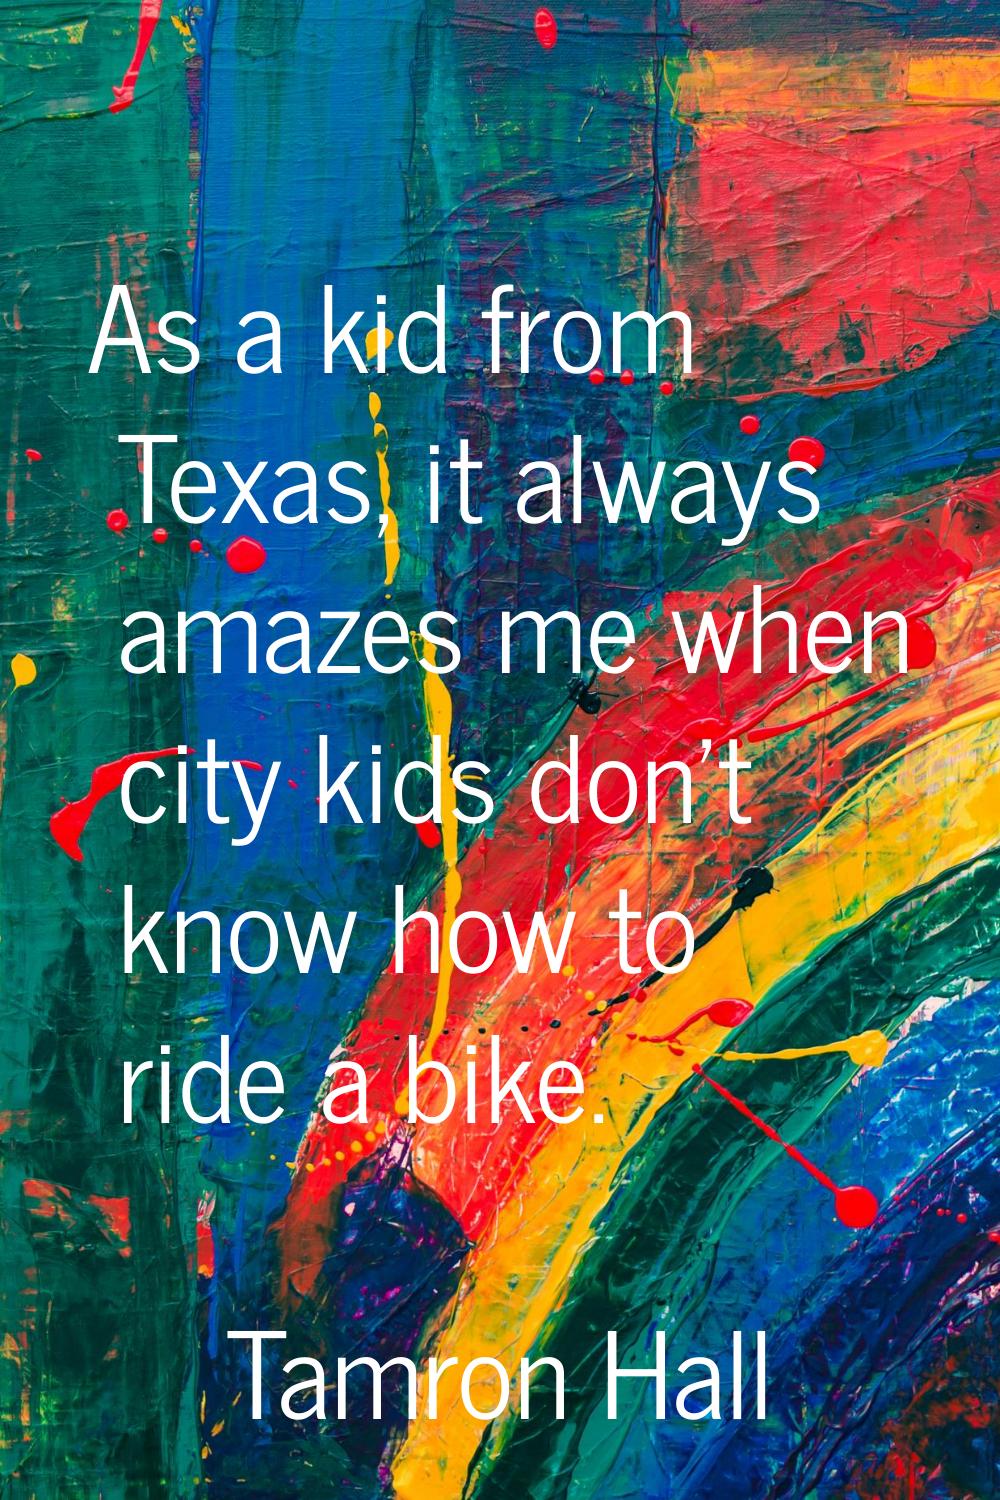 As a kid from Texas, it always amazes me when city kids don't know how to ride a bike.